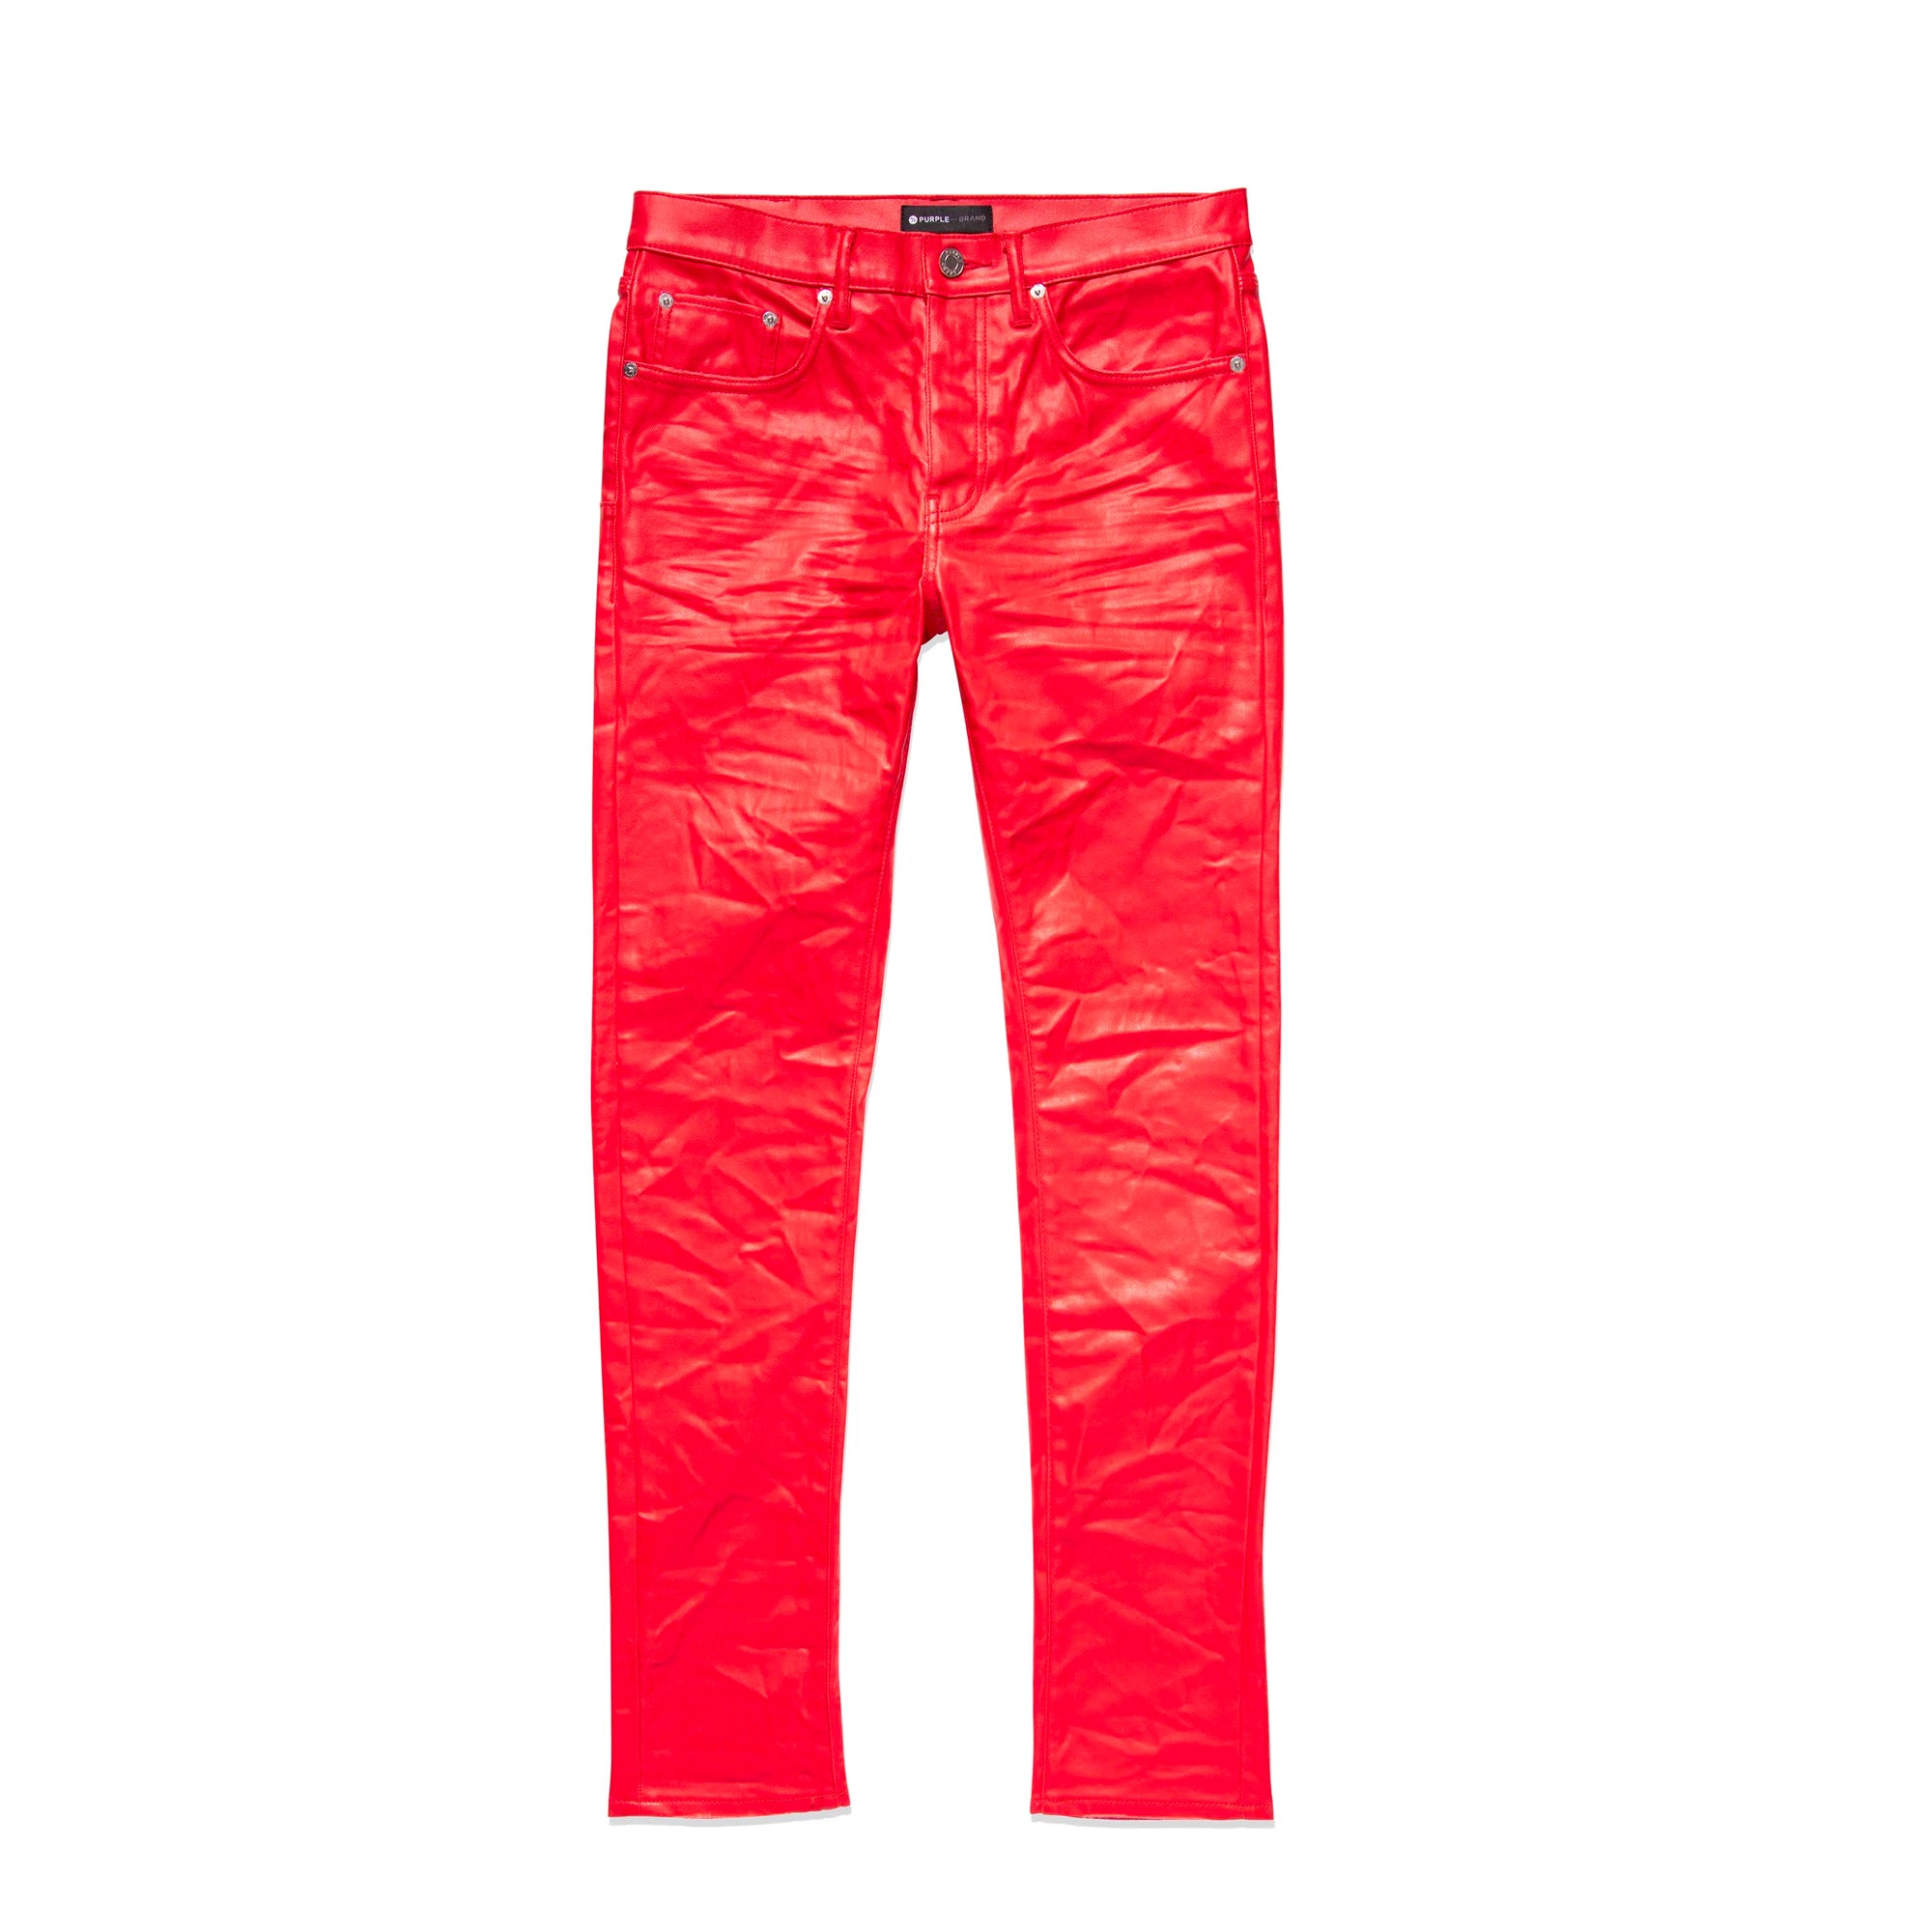 Purple Brand Mens Red Patent Leather Film Jeans